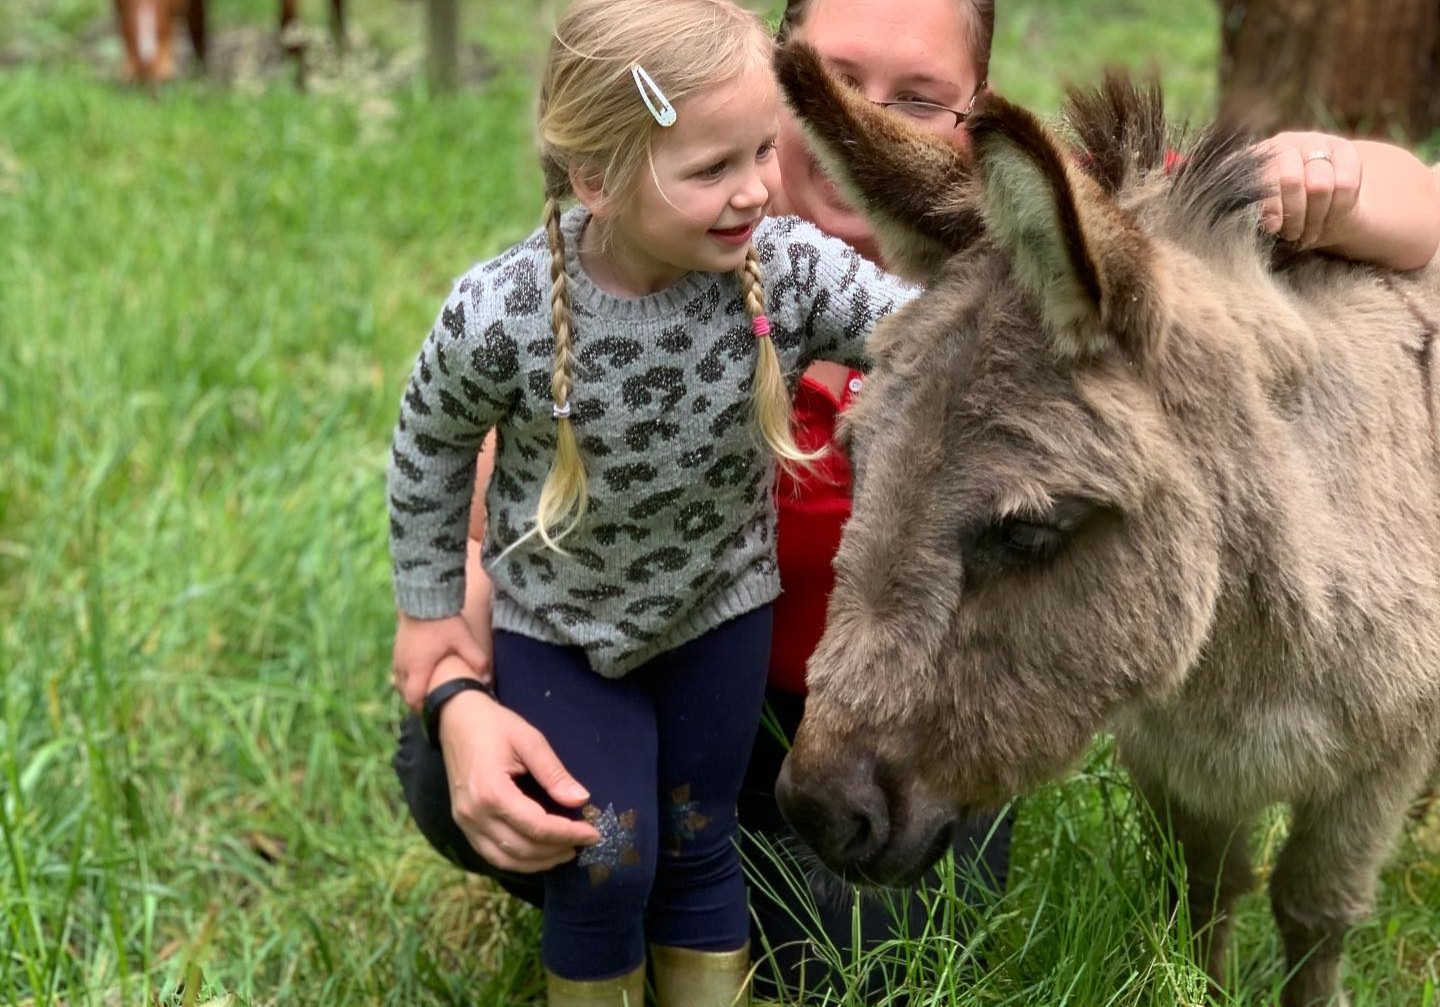 A young girl has a cuddle with a miniature donkey. A woman can be seen in the background, sitting next to the girl. Bright green grass surround them and a horse can be seen grazing in the distance.